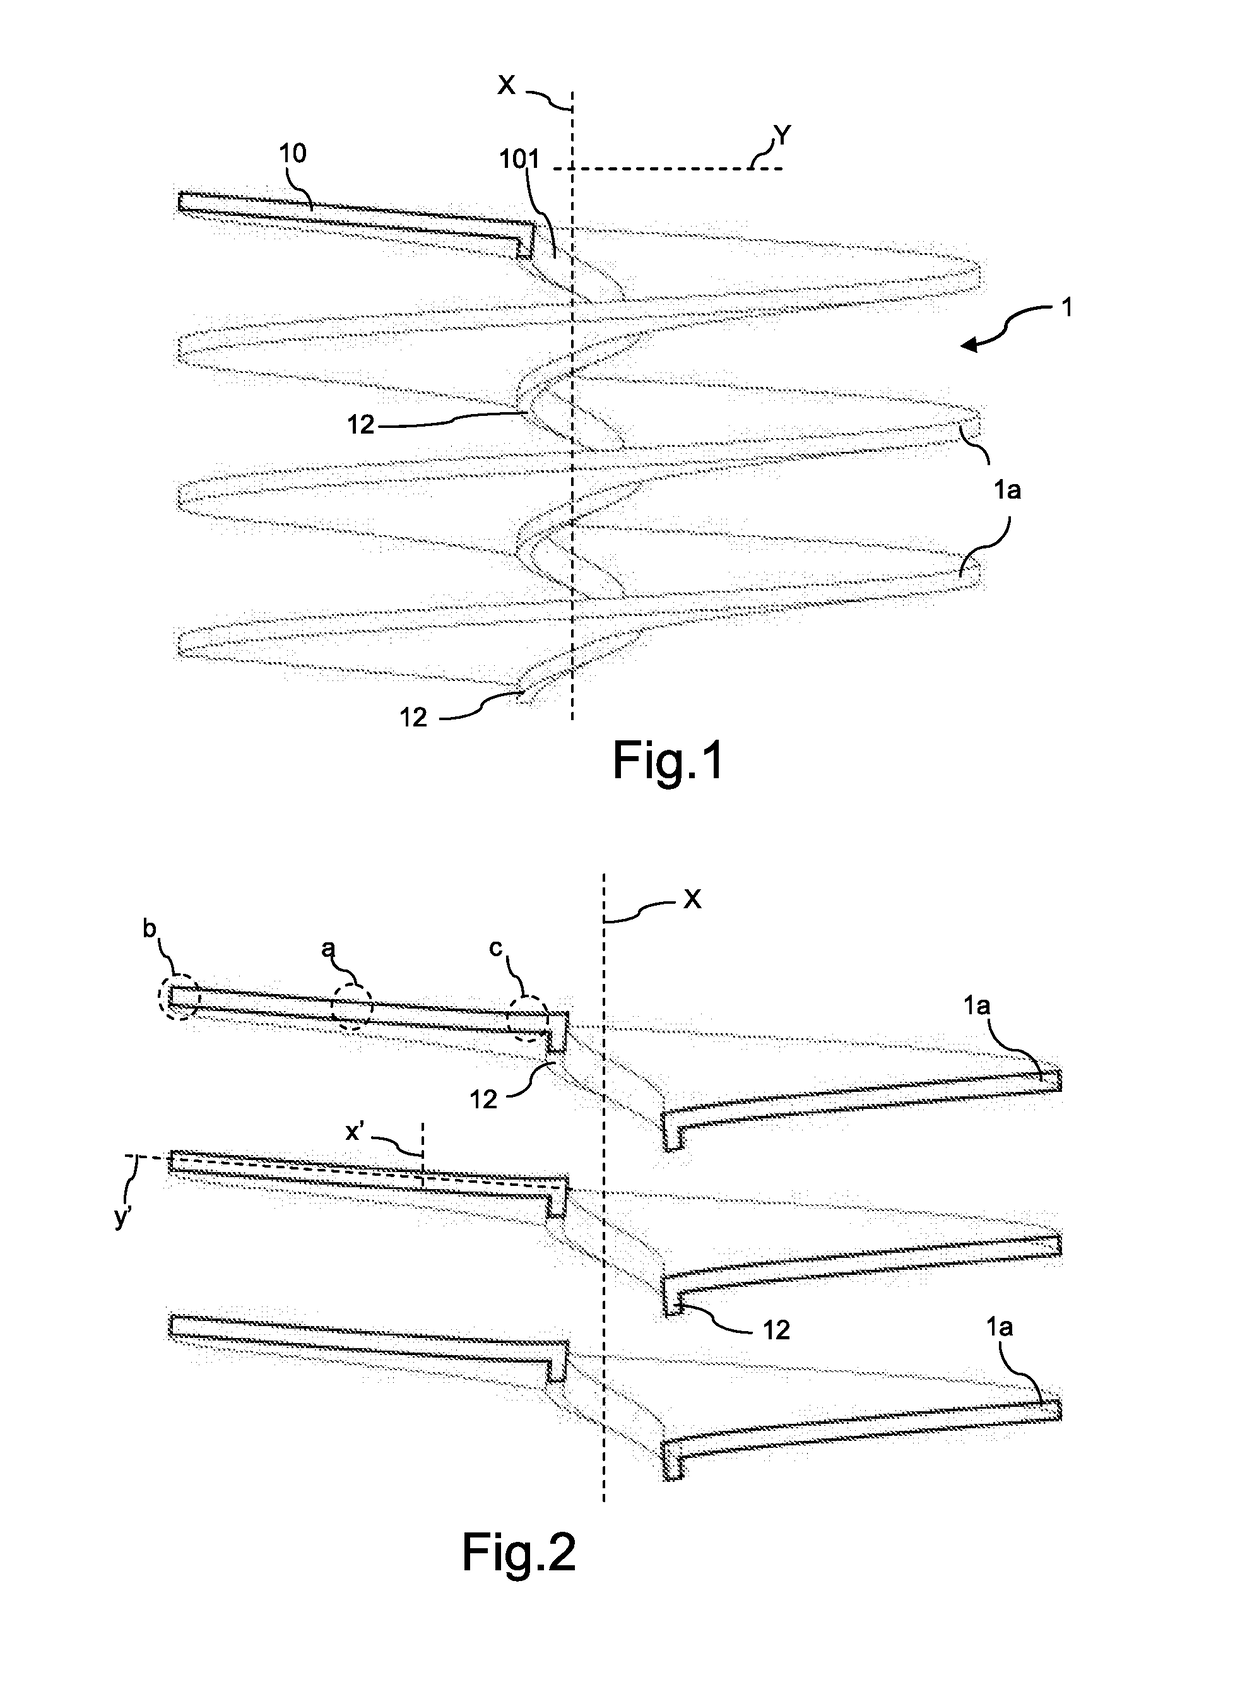 Filtering device for dust and other pollutants